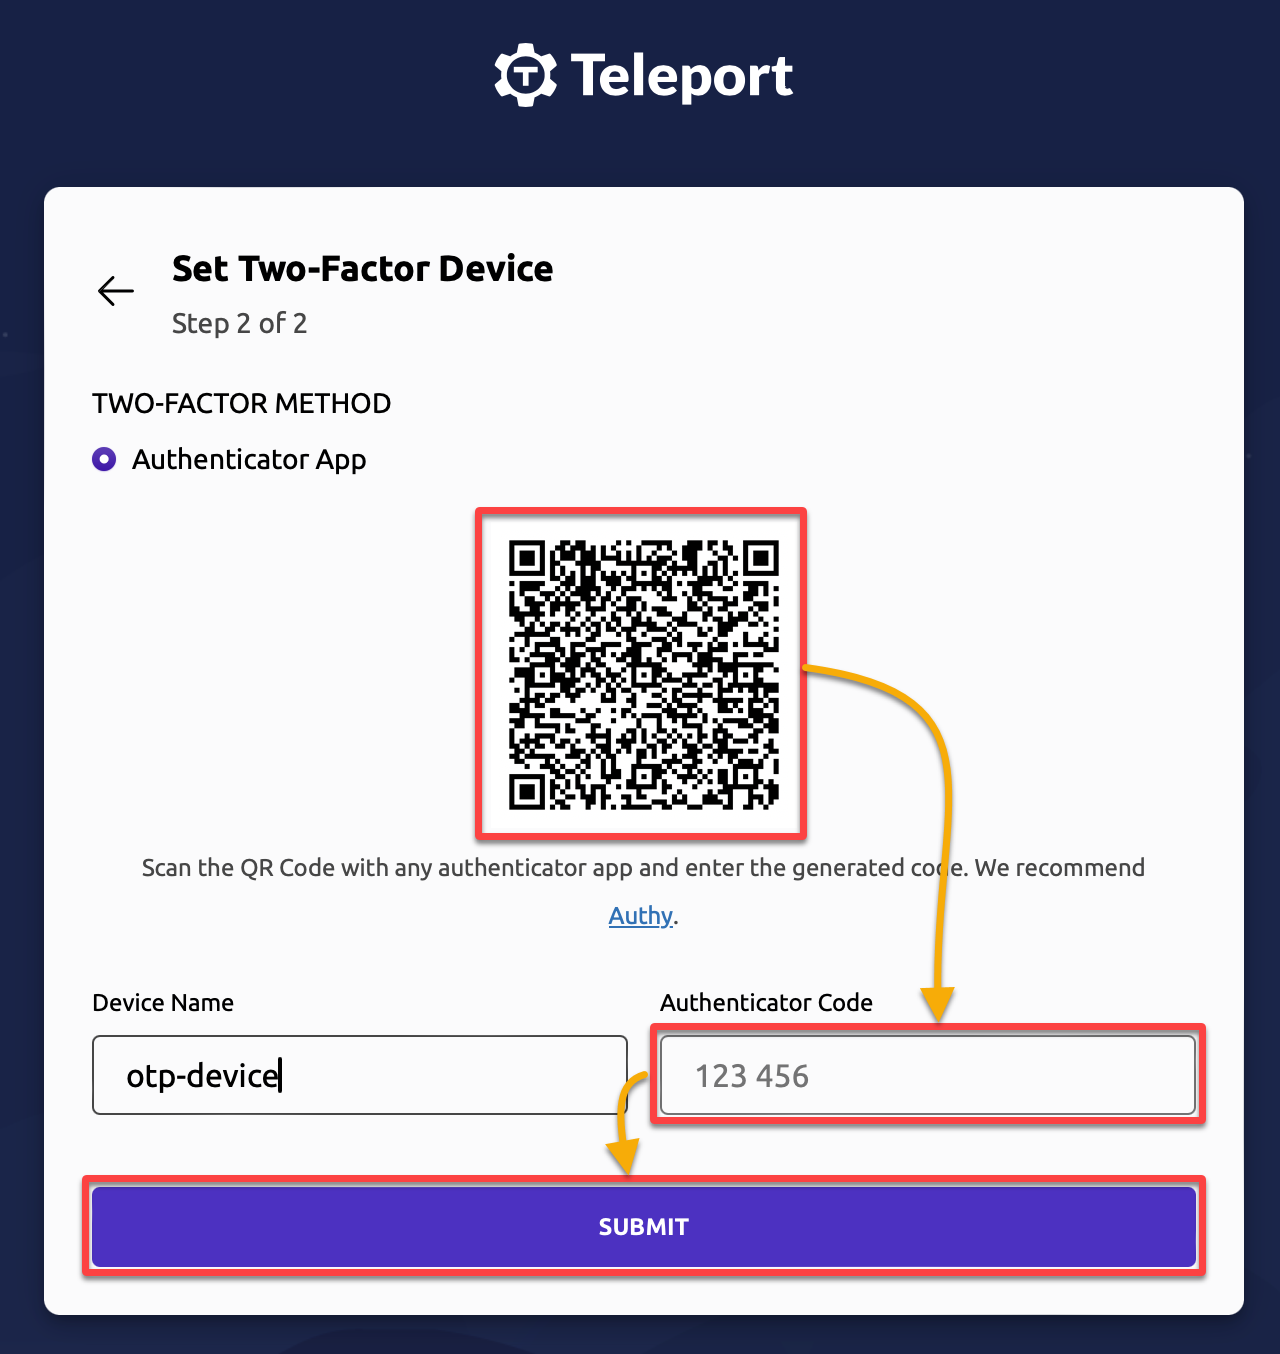 Setting up two-factor authentication